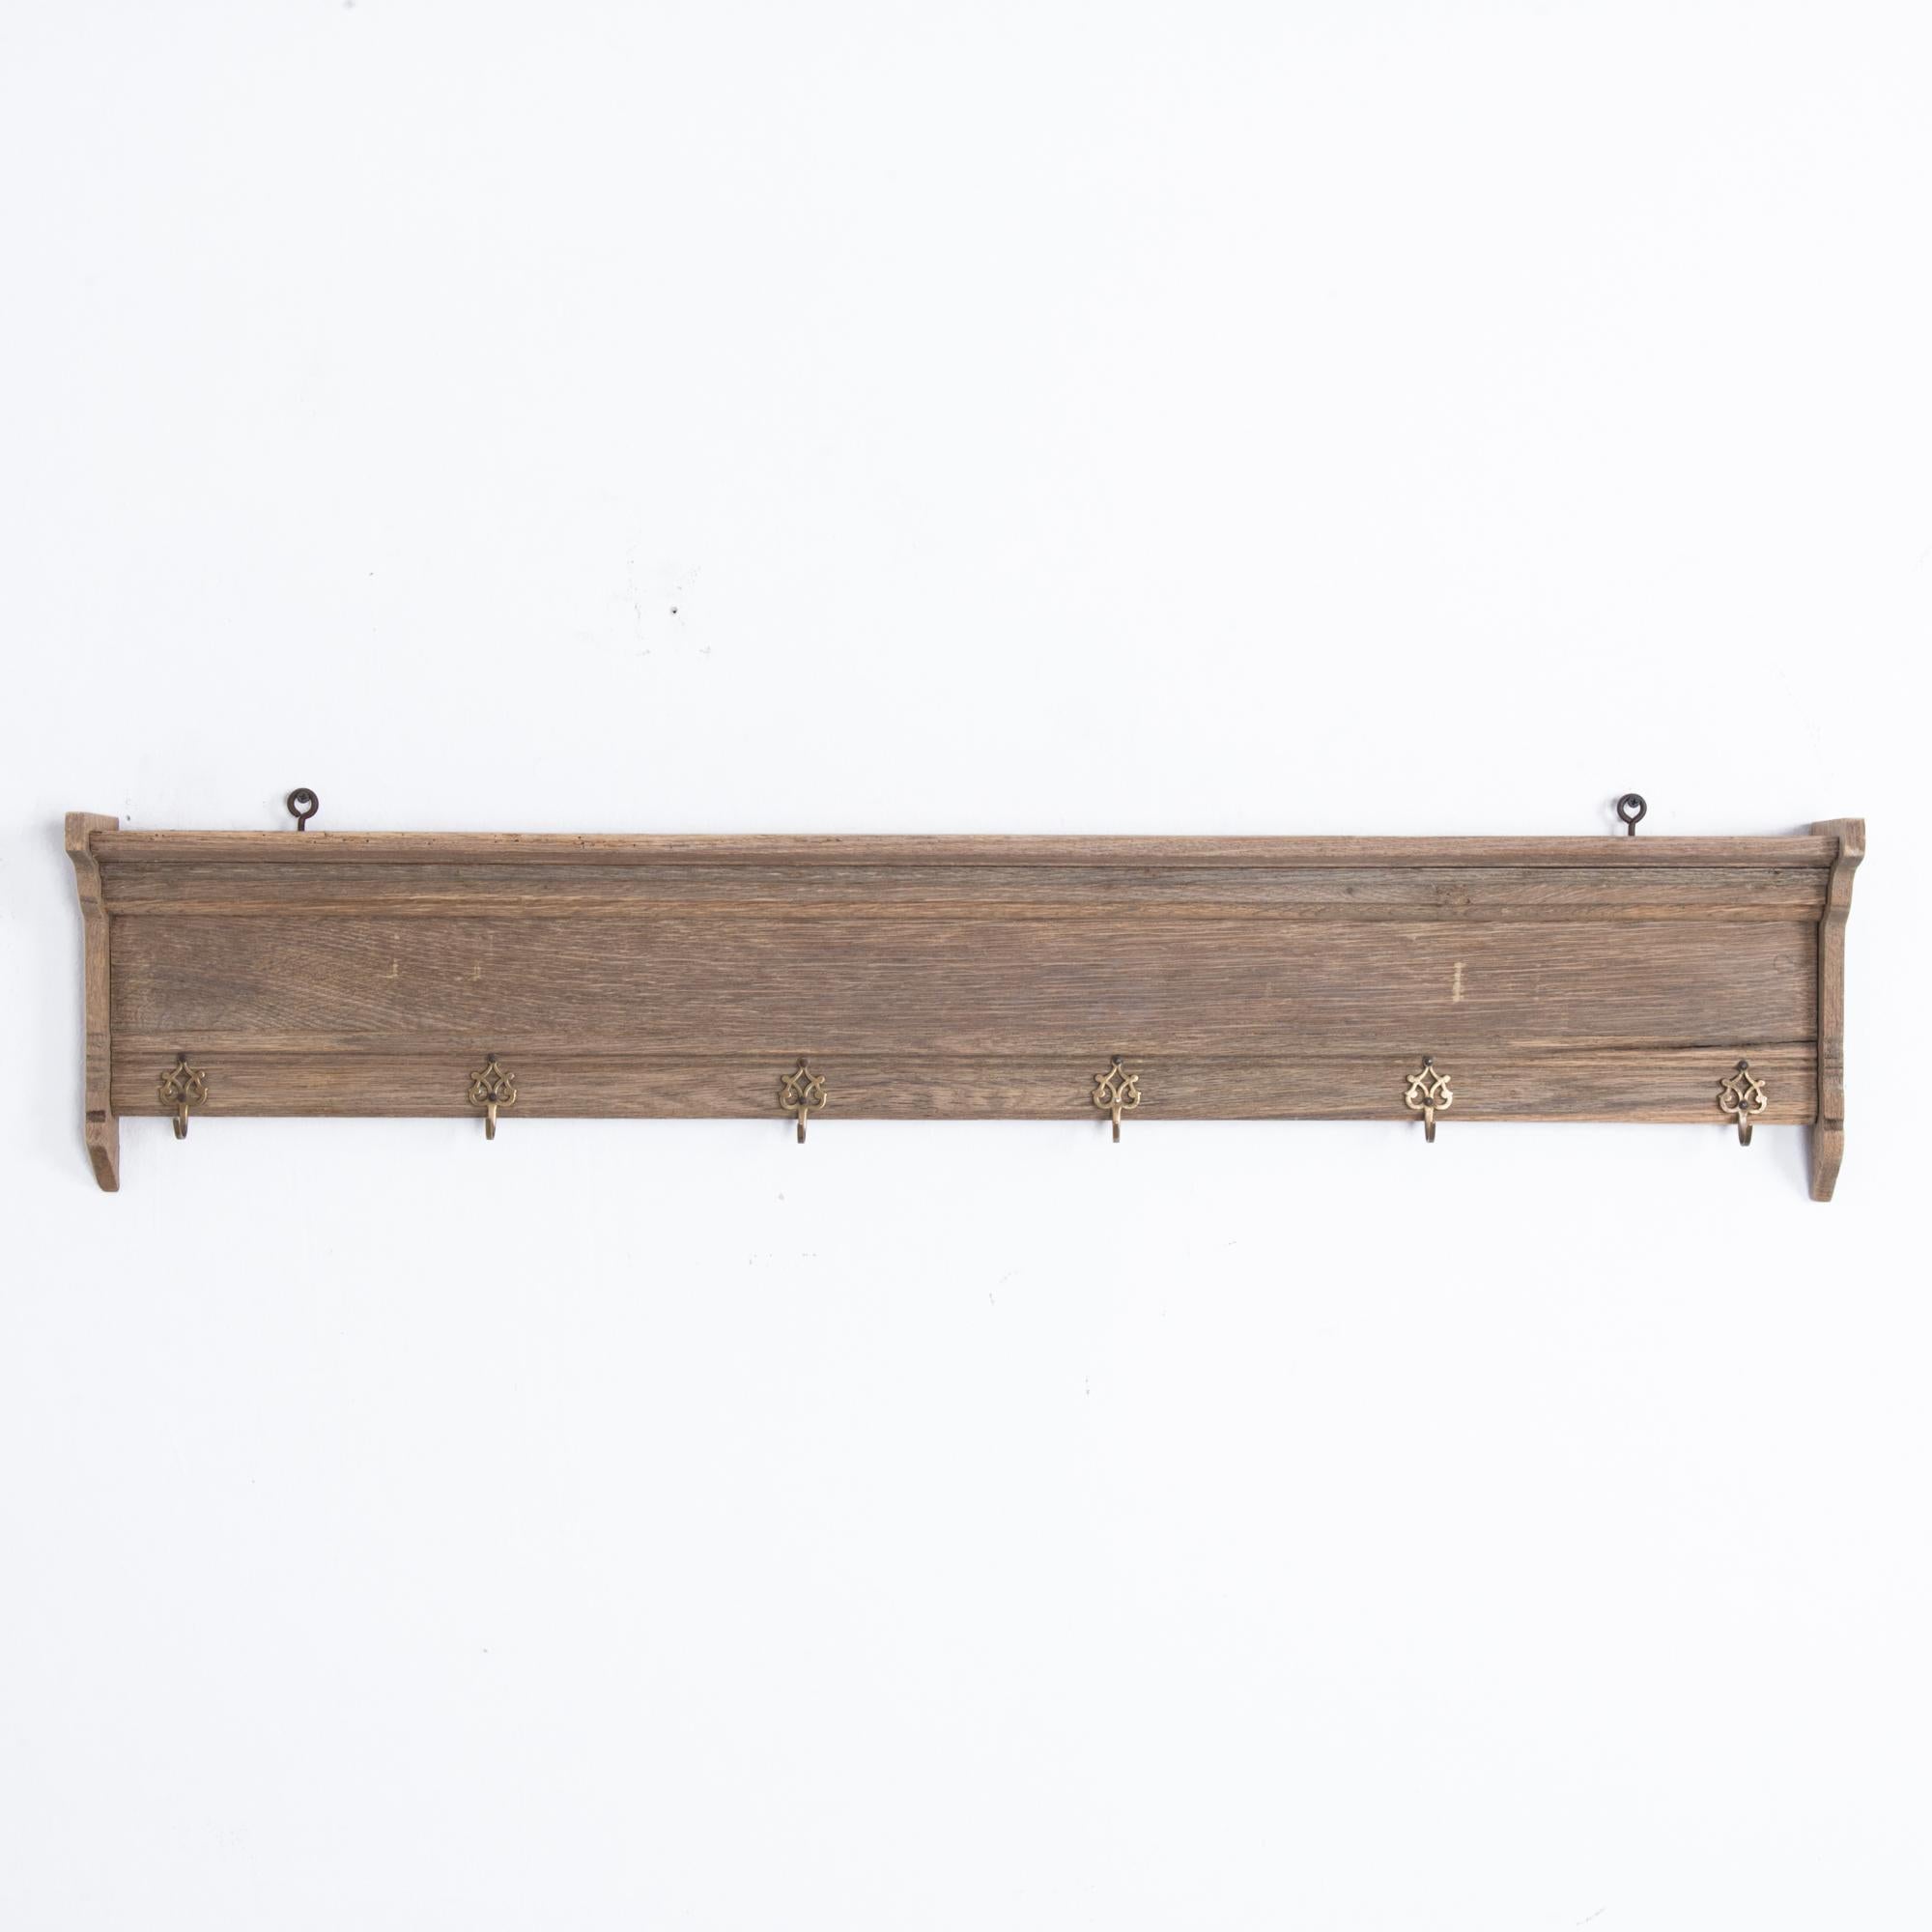 This wooden wall coat rack was made in Belgium, circa 1900 and offers a touch of elegance to your entryway. Mounted on the wall using two screw eyes on top, the rack features crown molding on the upper section, side brackets, and six U-hooks with